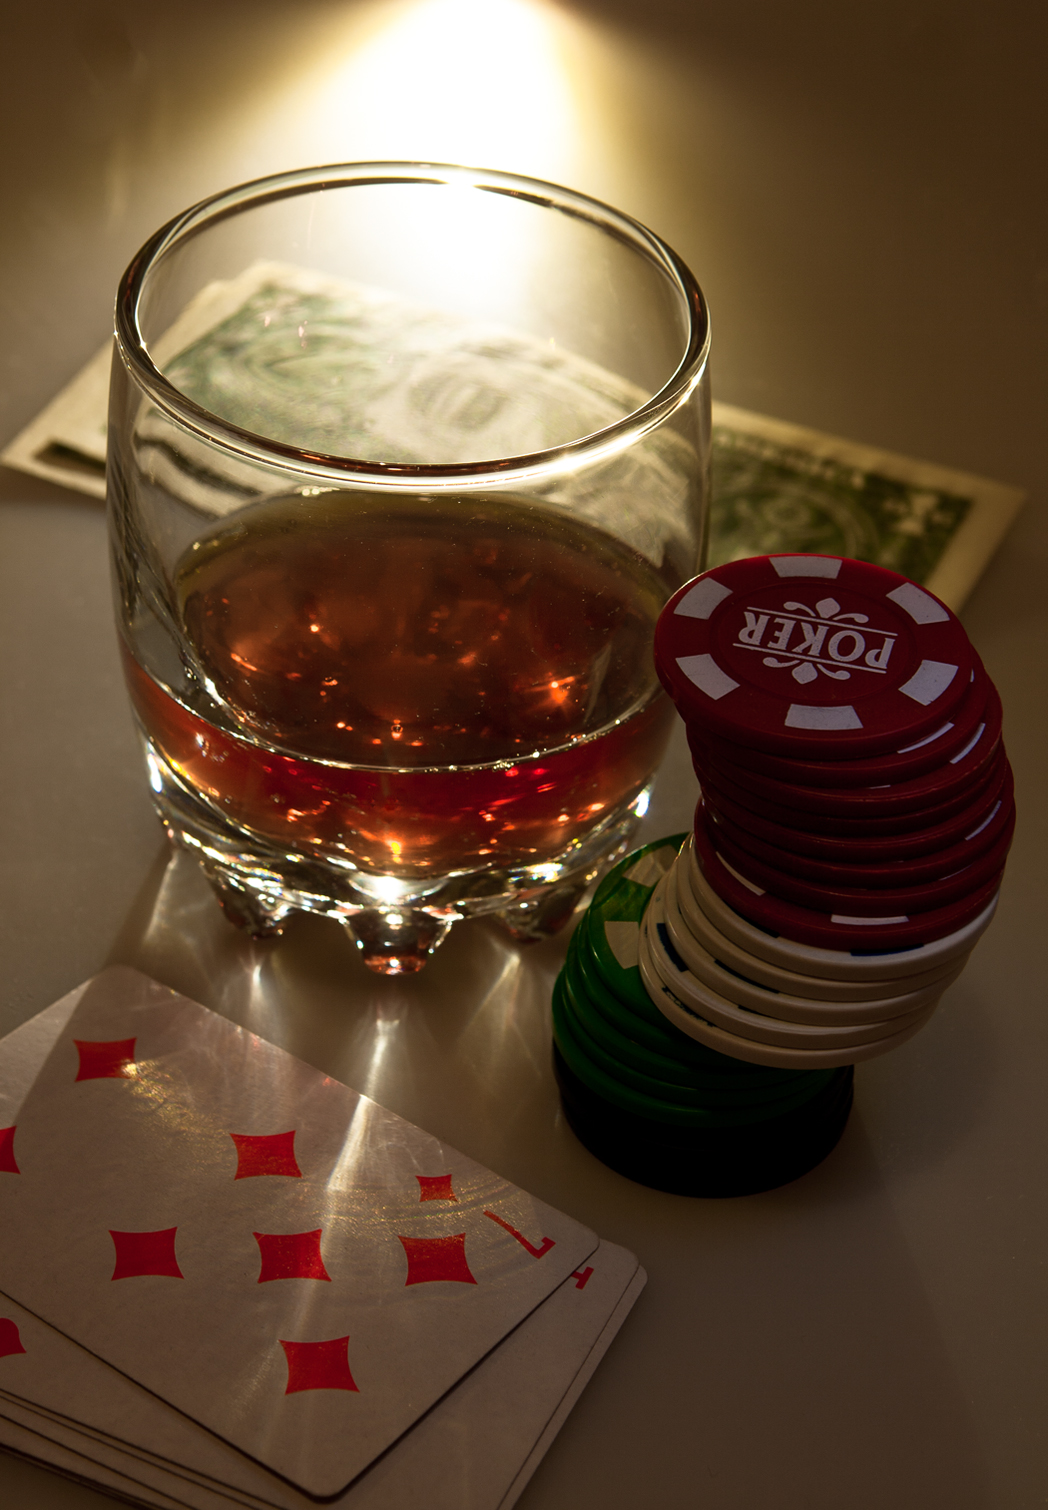 Drink and playing cards, Alcohol, Cards, Chip, Cognac, HQ Photo